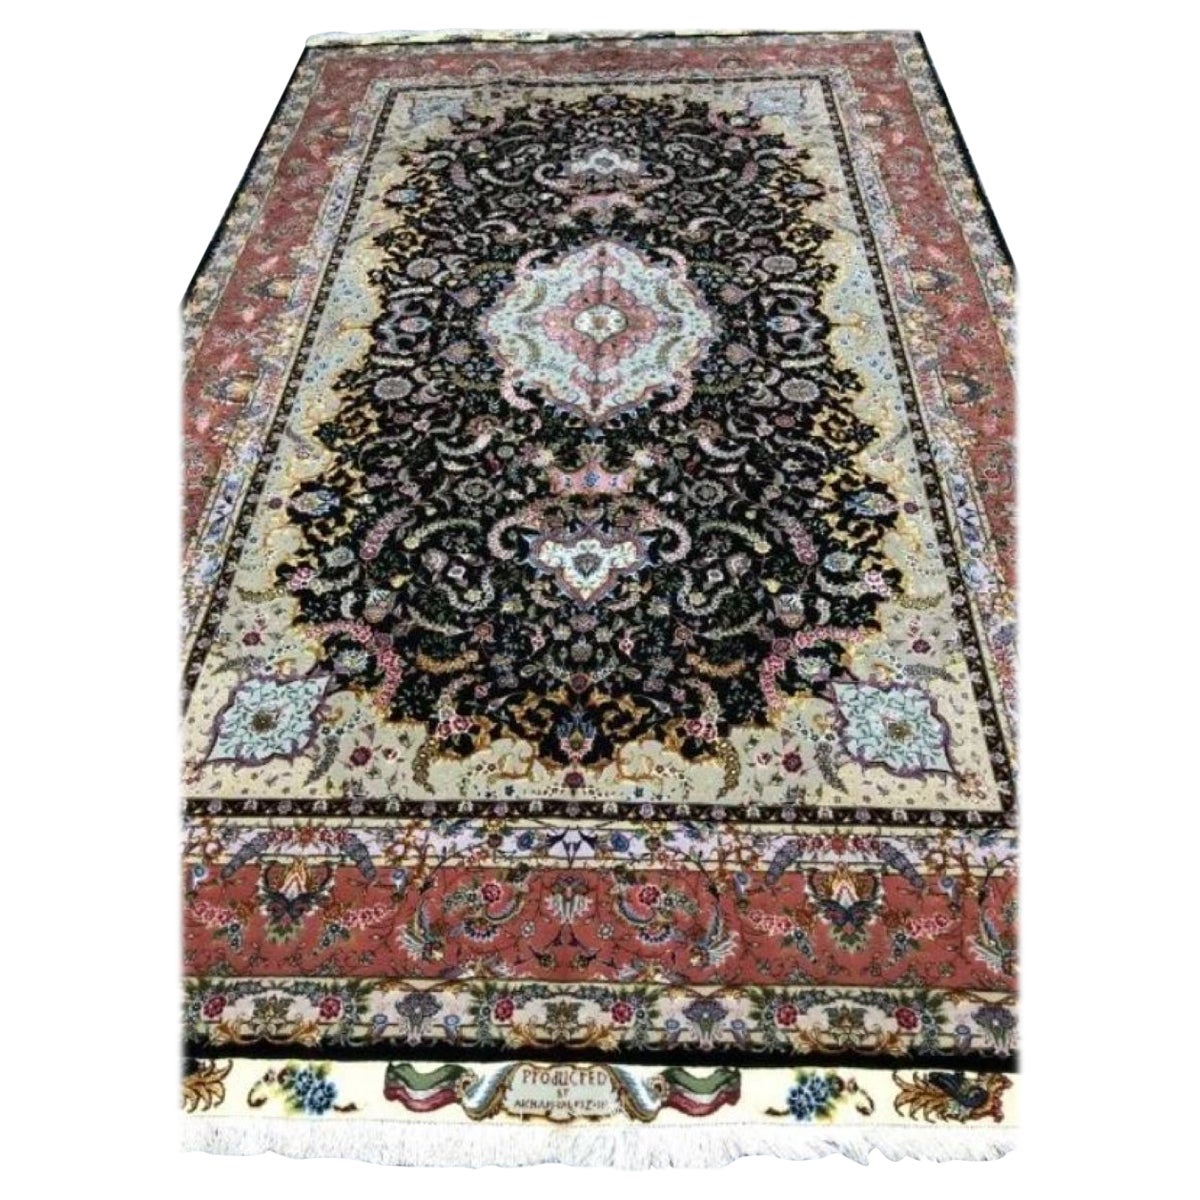 Very fine Tabriz Persian rug with wool and silk pile and silk foundation. This rug has approximately 650 knots per sq inch with a total of 6,500,000 knots tied by hand one by one. It took 3.5 years to complete this beautiful piece of art. The